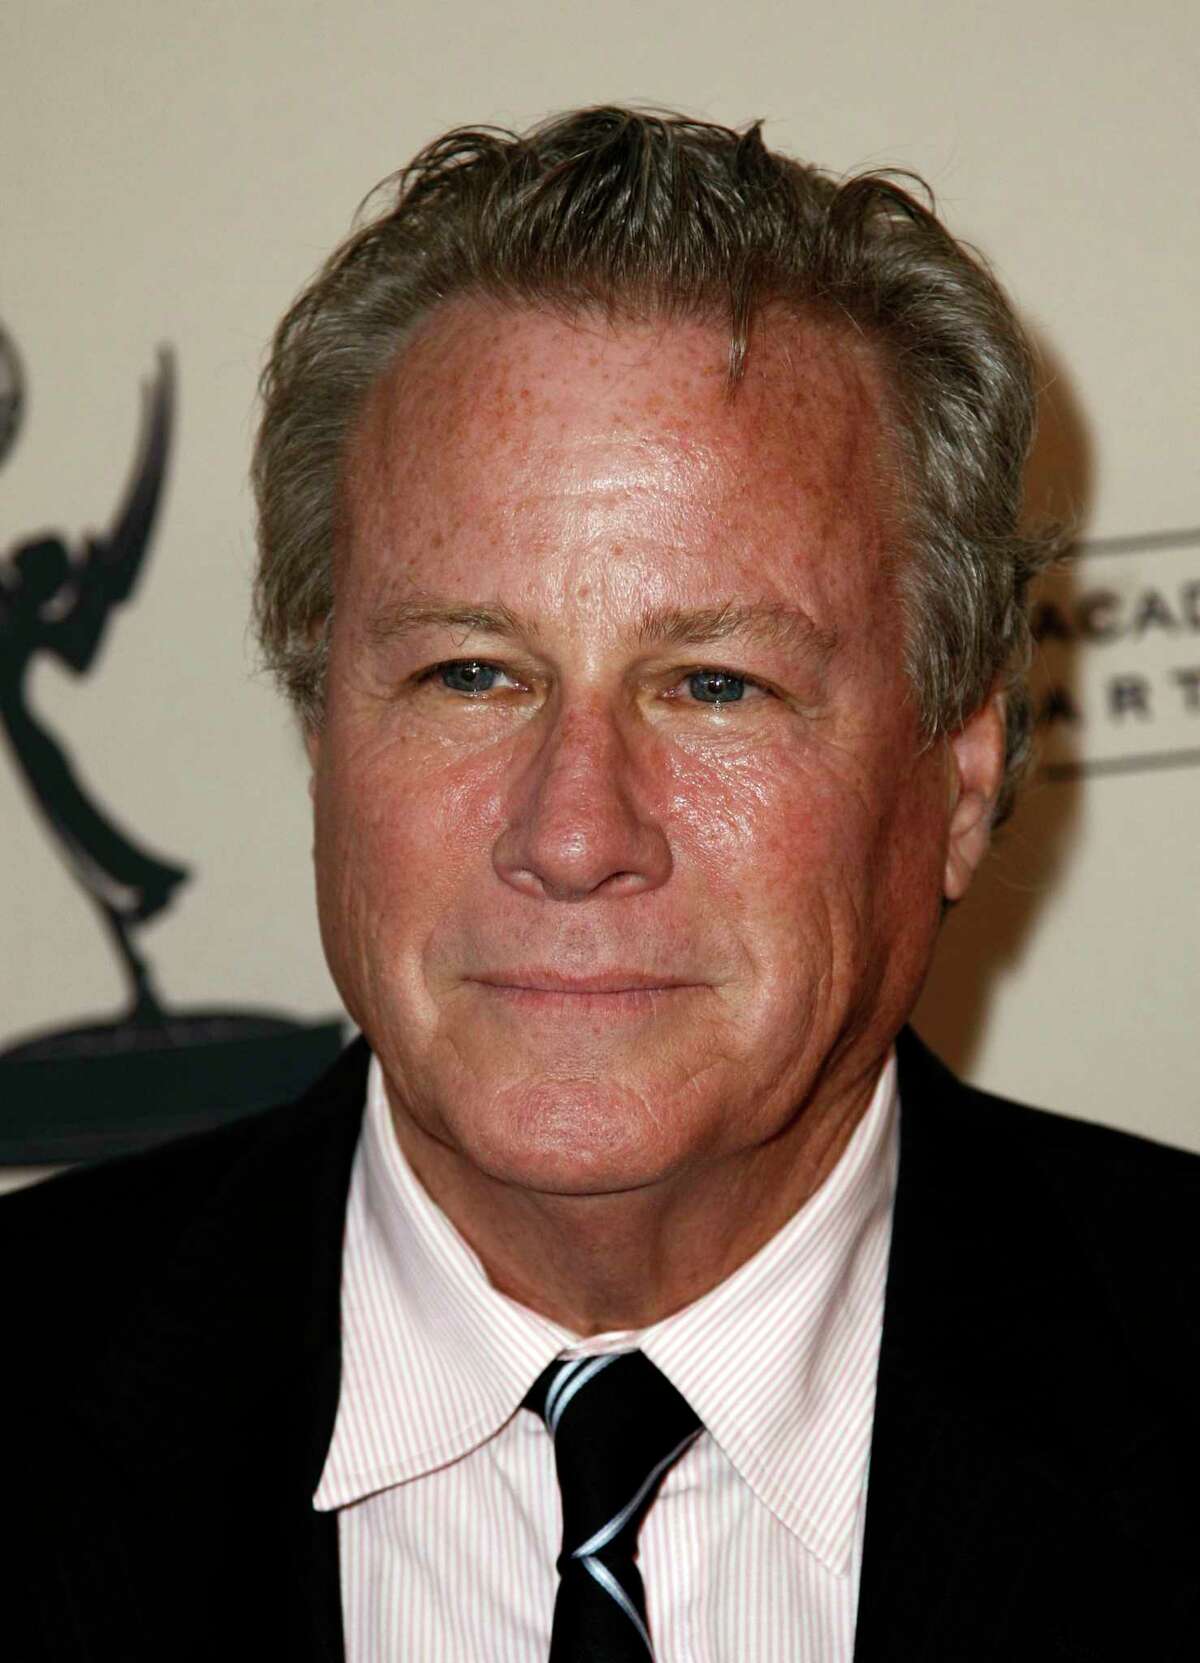 FILE - In this Sept. 12, 2011 file photo, actor John Heard arrives at Academy of Television Arts and Sciences Producers Peer Group celebration of the 63rd Primetime Emmy Awards in Los Angeles. Heard, best known for playing the father in the Â?“Home AloneÂ?” movie series, has died. He was 72. His death was confirmed by the Santa Clara Medical ExaminerÂ?’s office in California on Saturday, July 22, 2017. (AP Photo/Matt Sayles)